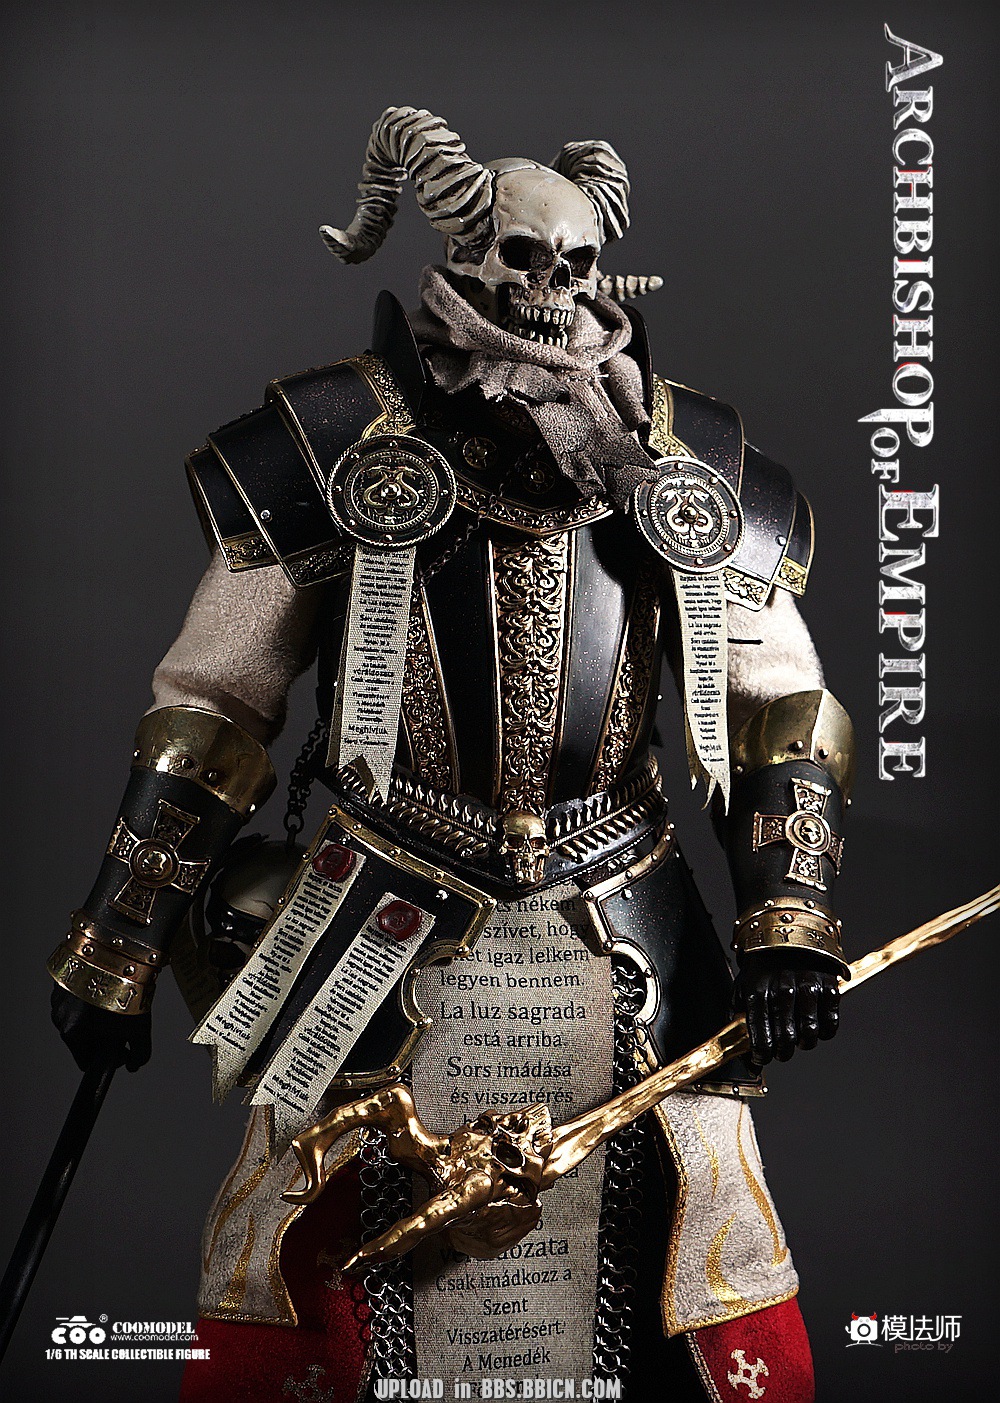 NightmareSeries - NEW PRODUCT: COOMODEL: 1/6 Nightmare Series-King of the Empire, Bishop of the Empire-Alloy Standard Edition/Pure Copper Collector's Edition NS016/7/8/9 23114410